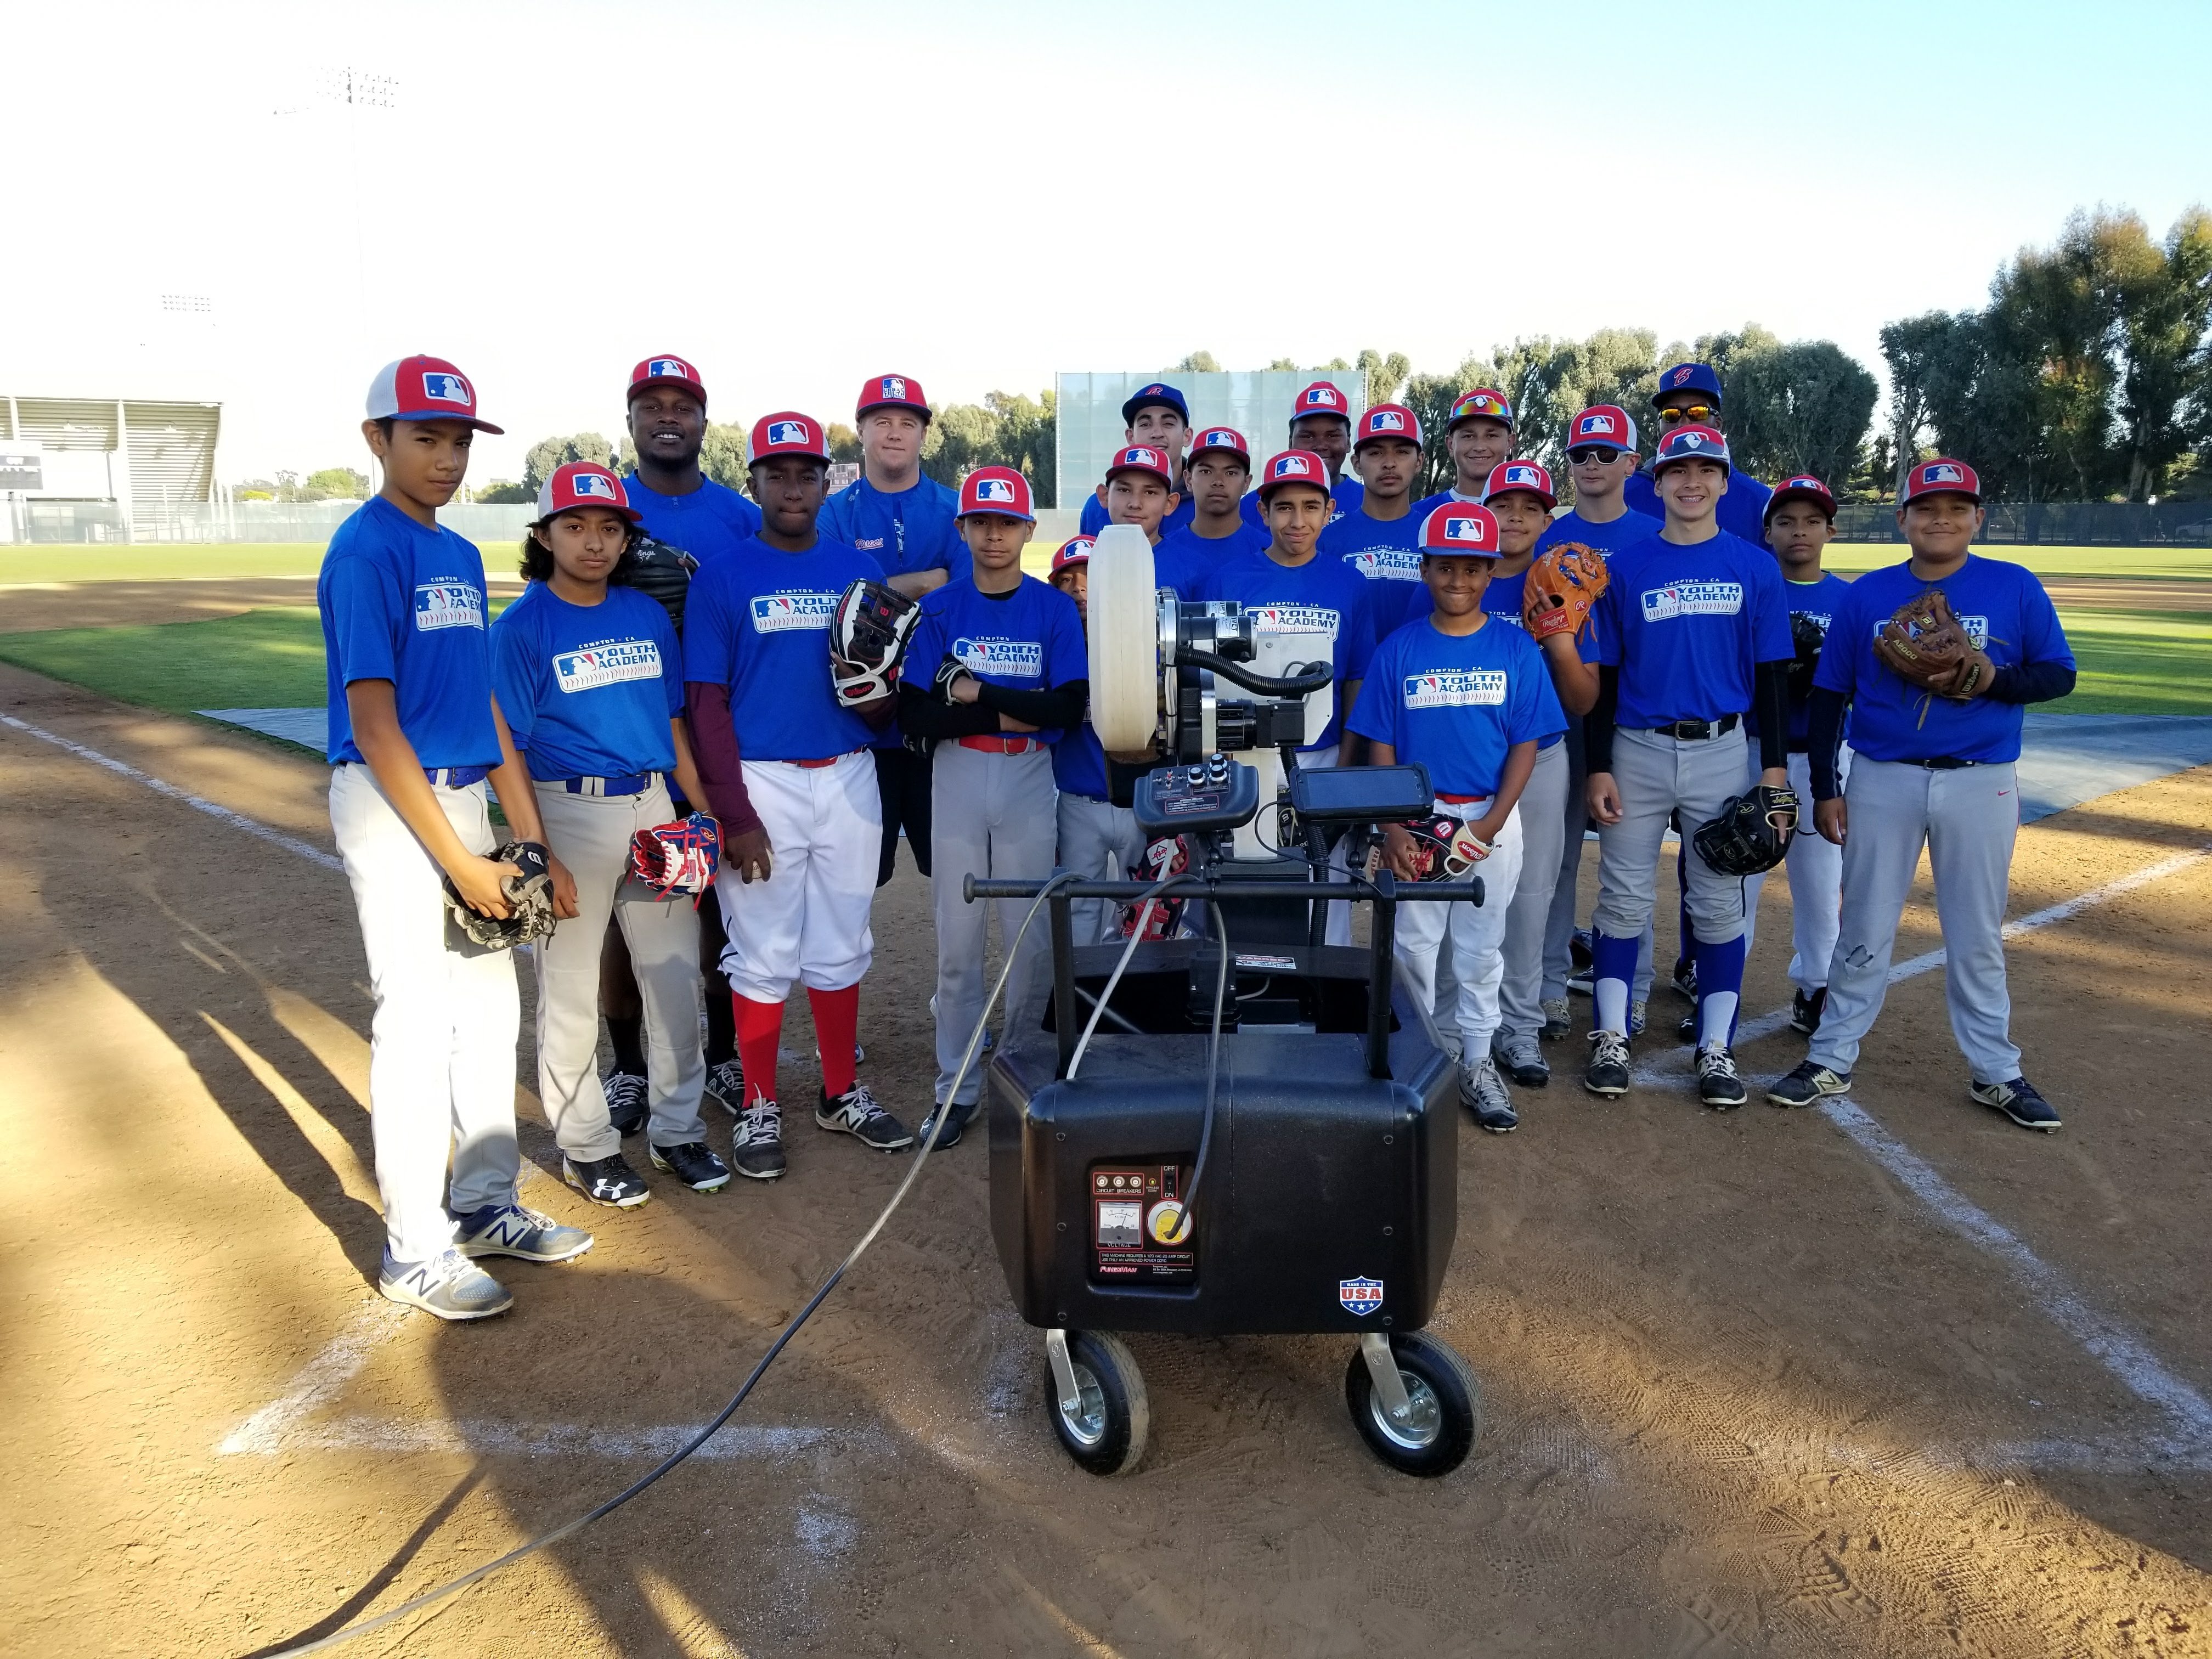 MLB Youth Academy in Compton Meets FungoMan